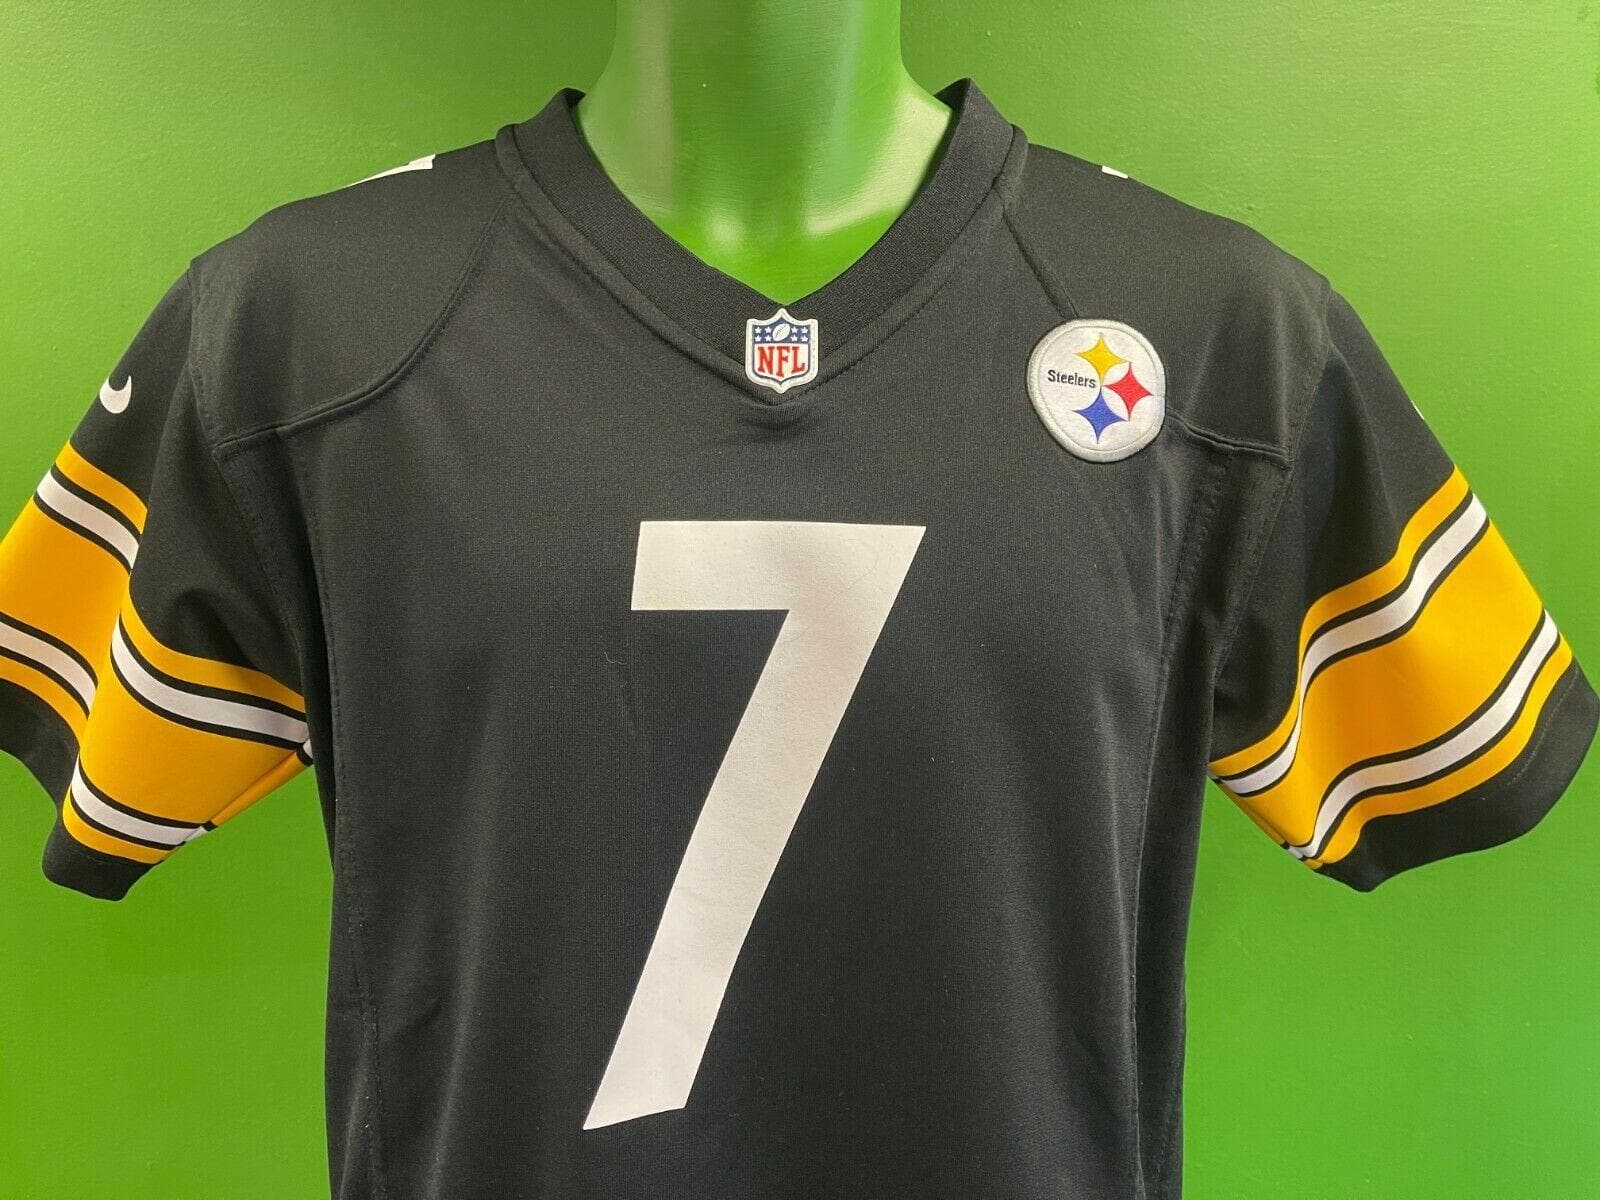 NFL Pittsburgh Steelers Roethisberger #7 Game Jersey Youth L 14-16